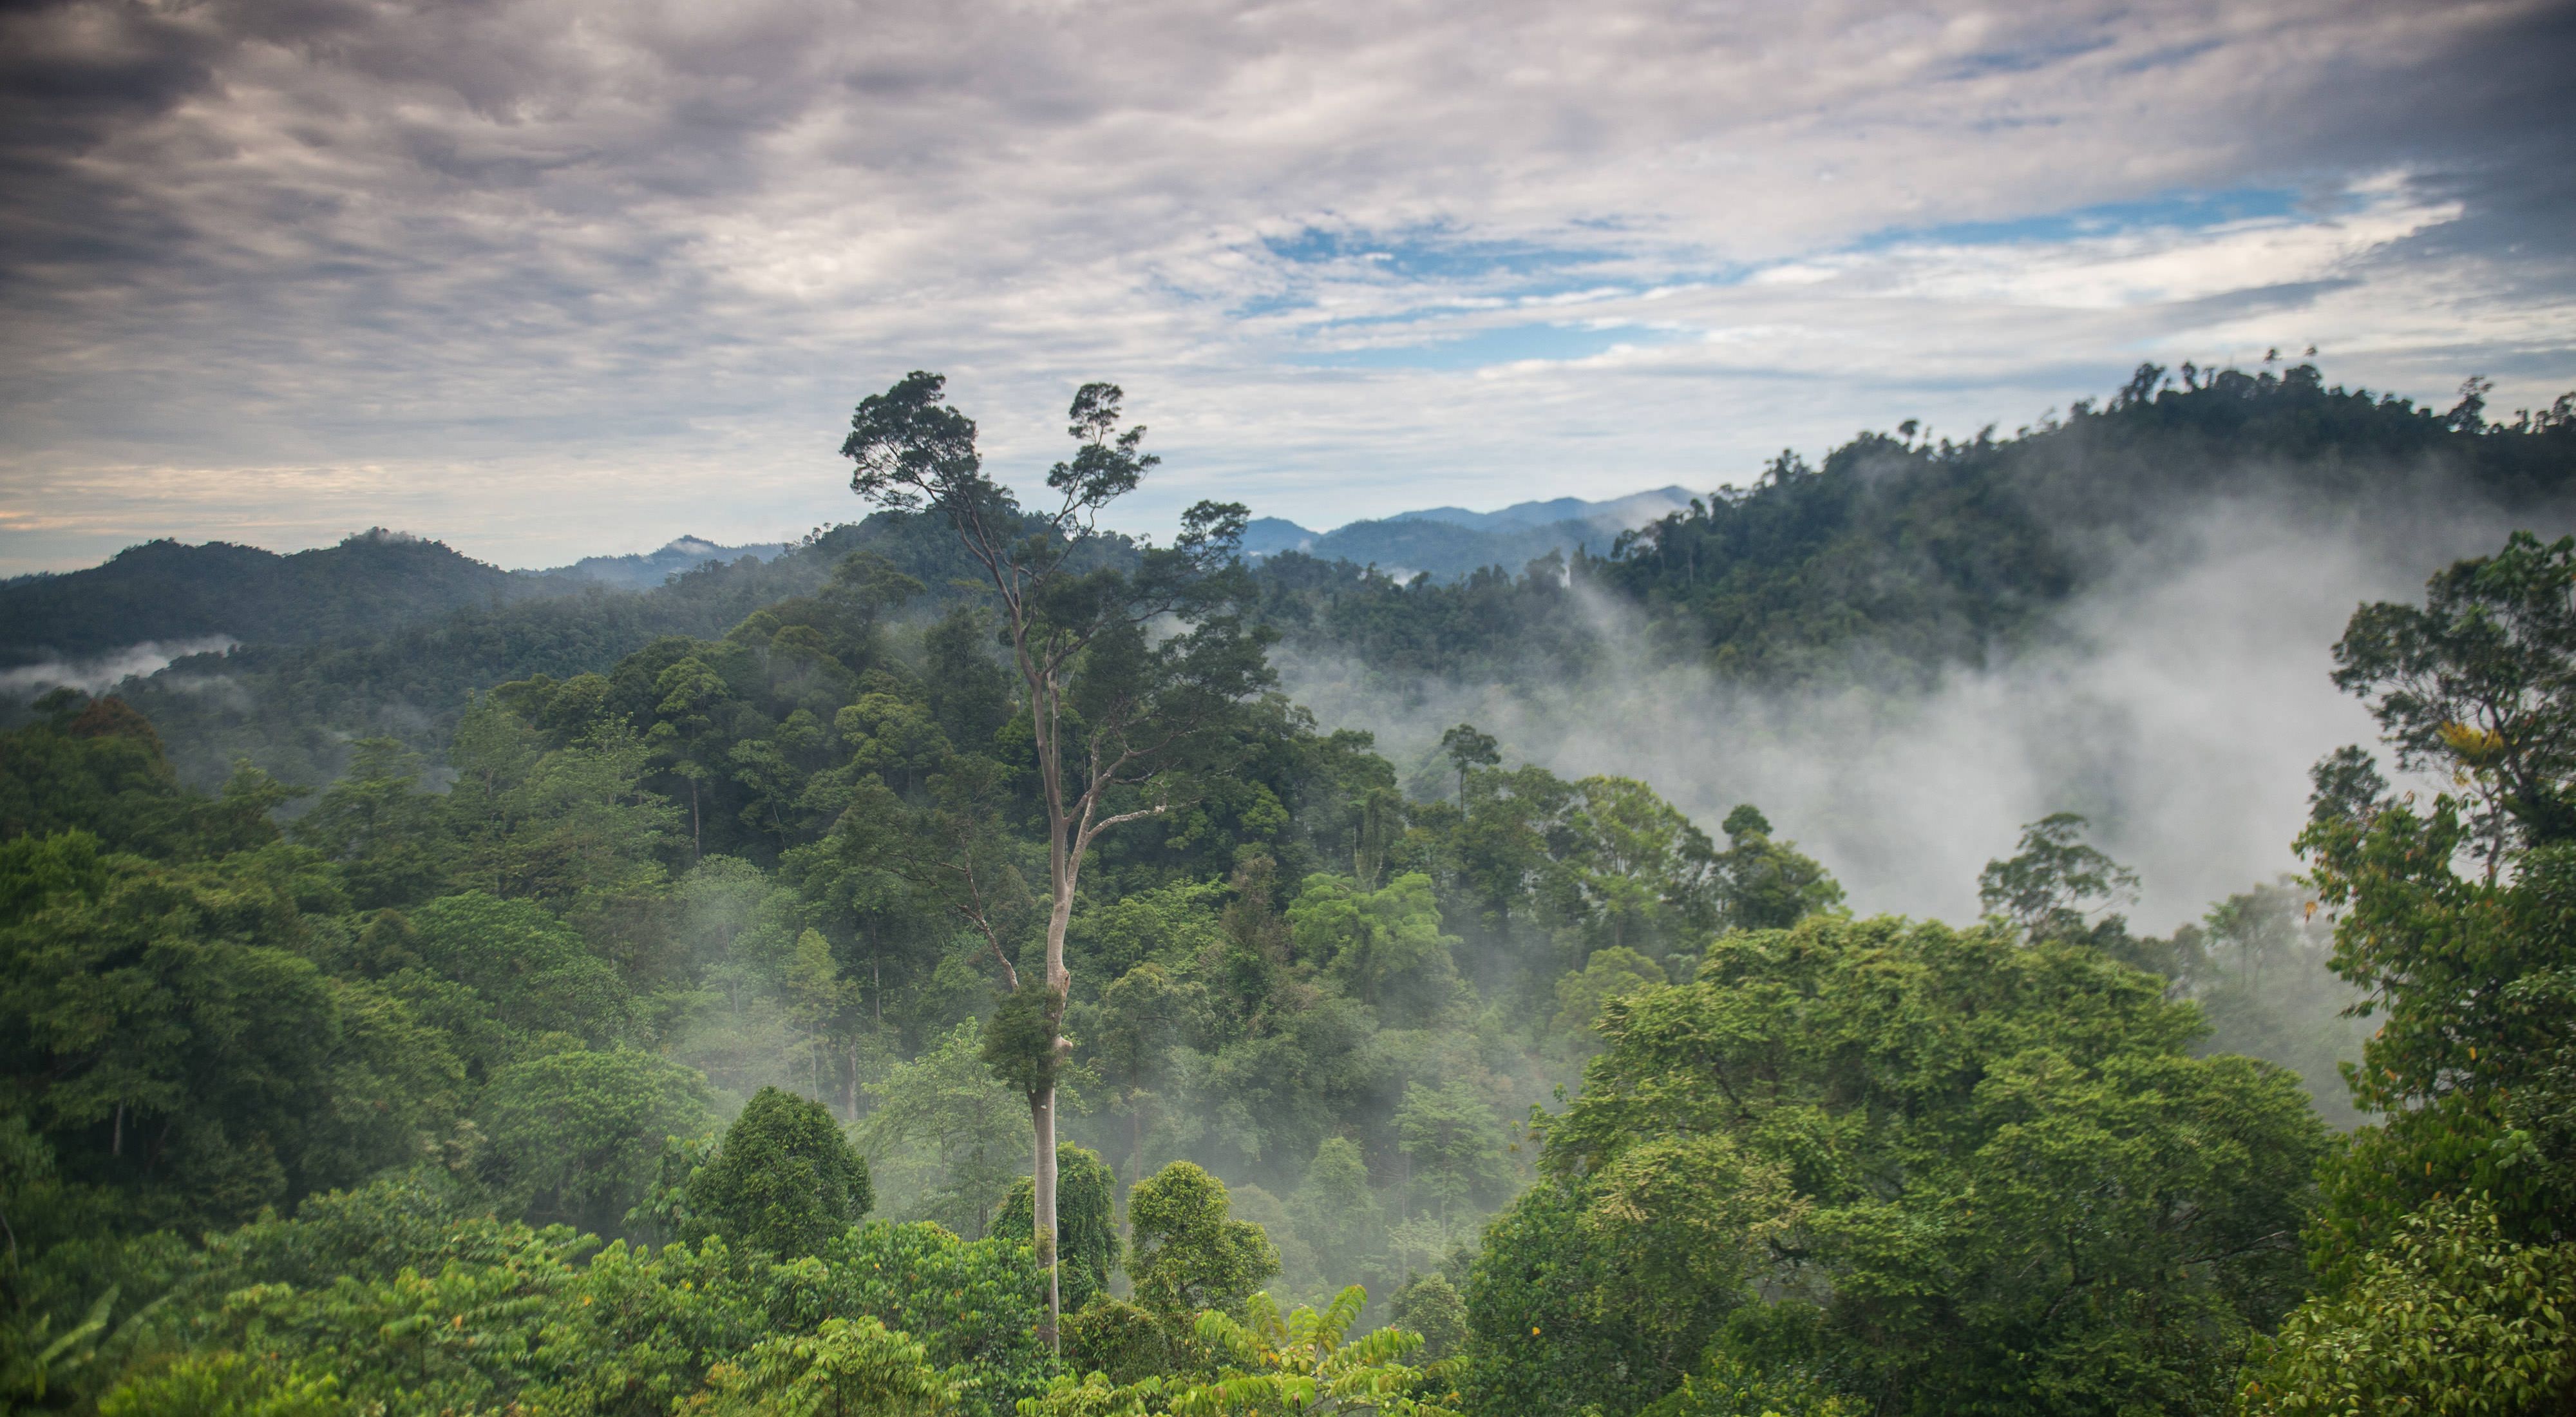 Mist over a forest in East Kalimantan, Indonesia.